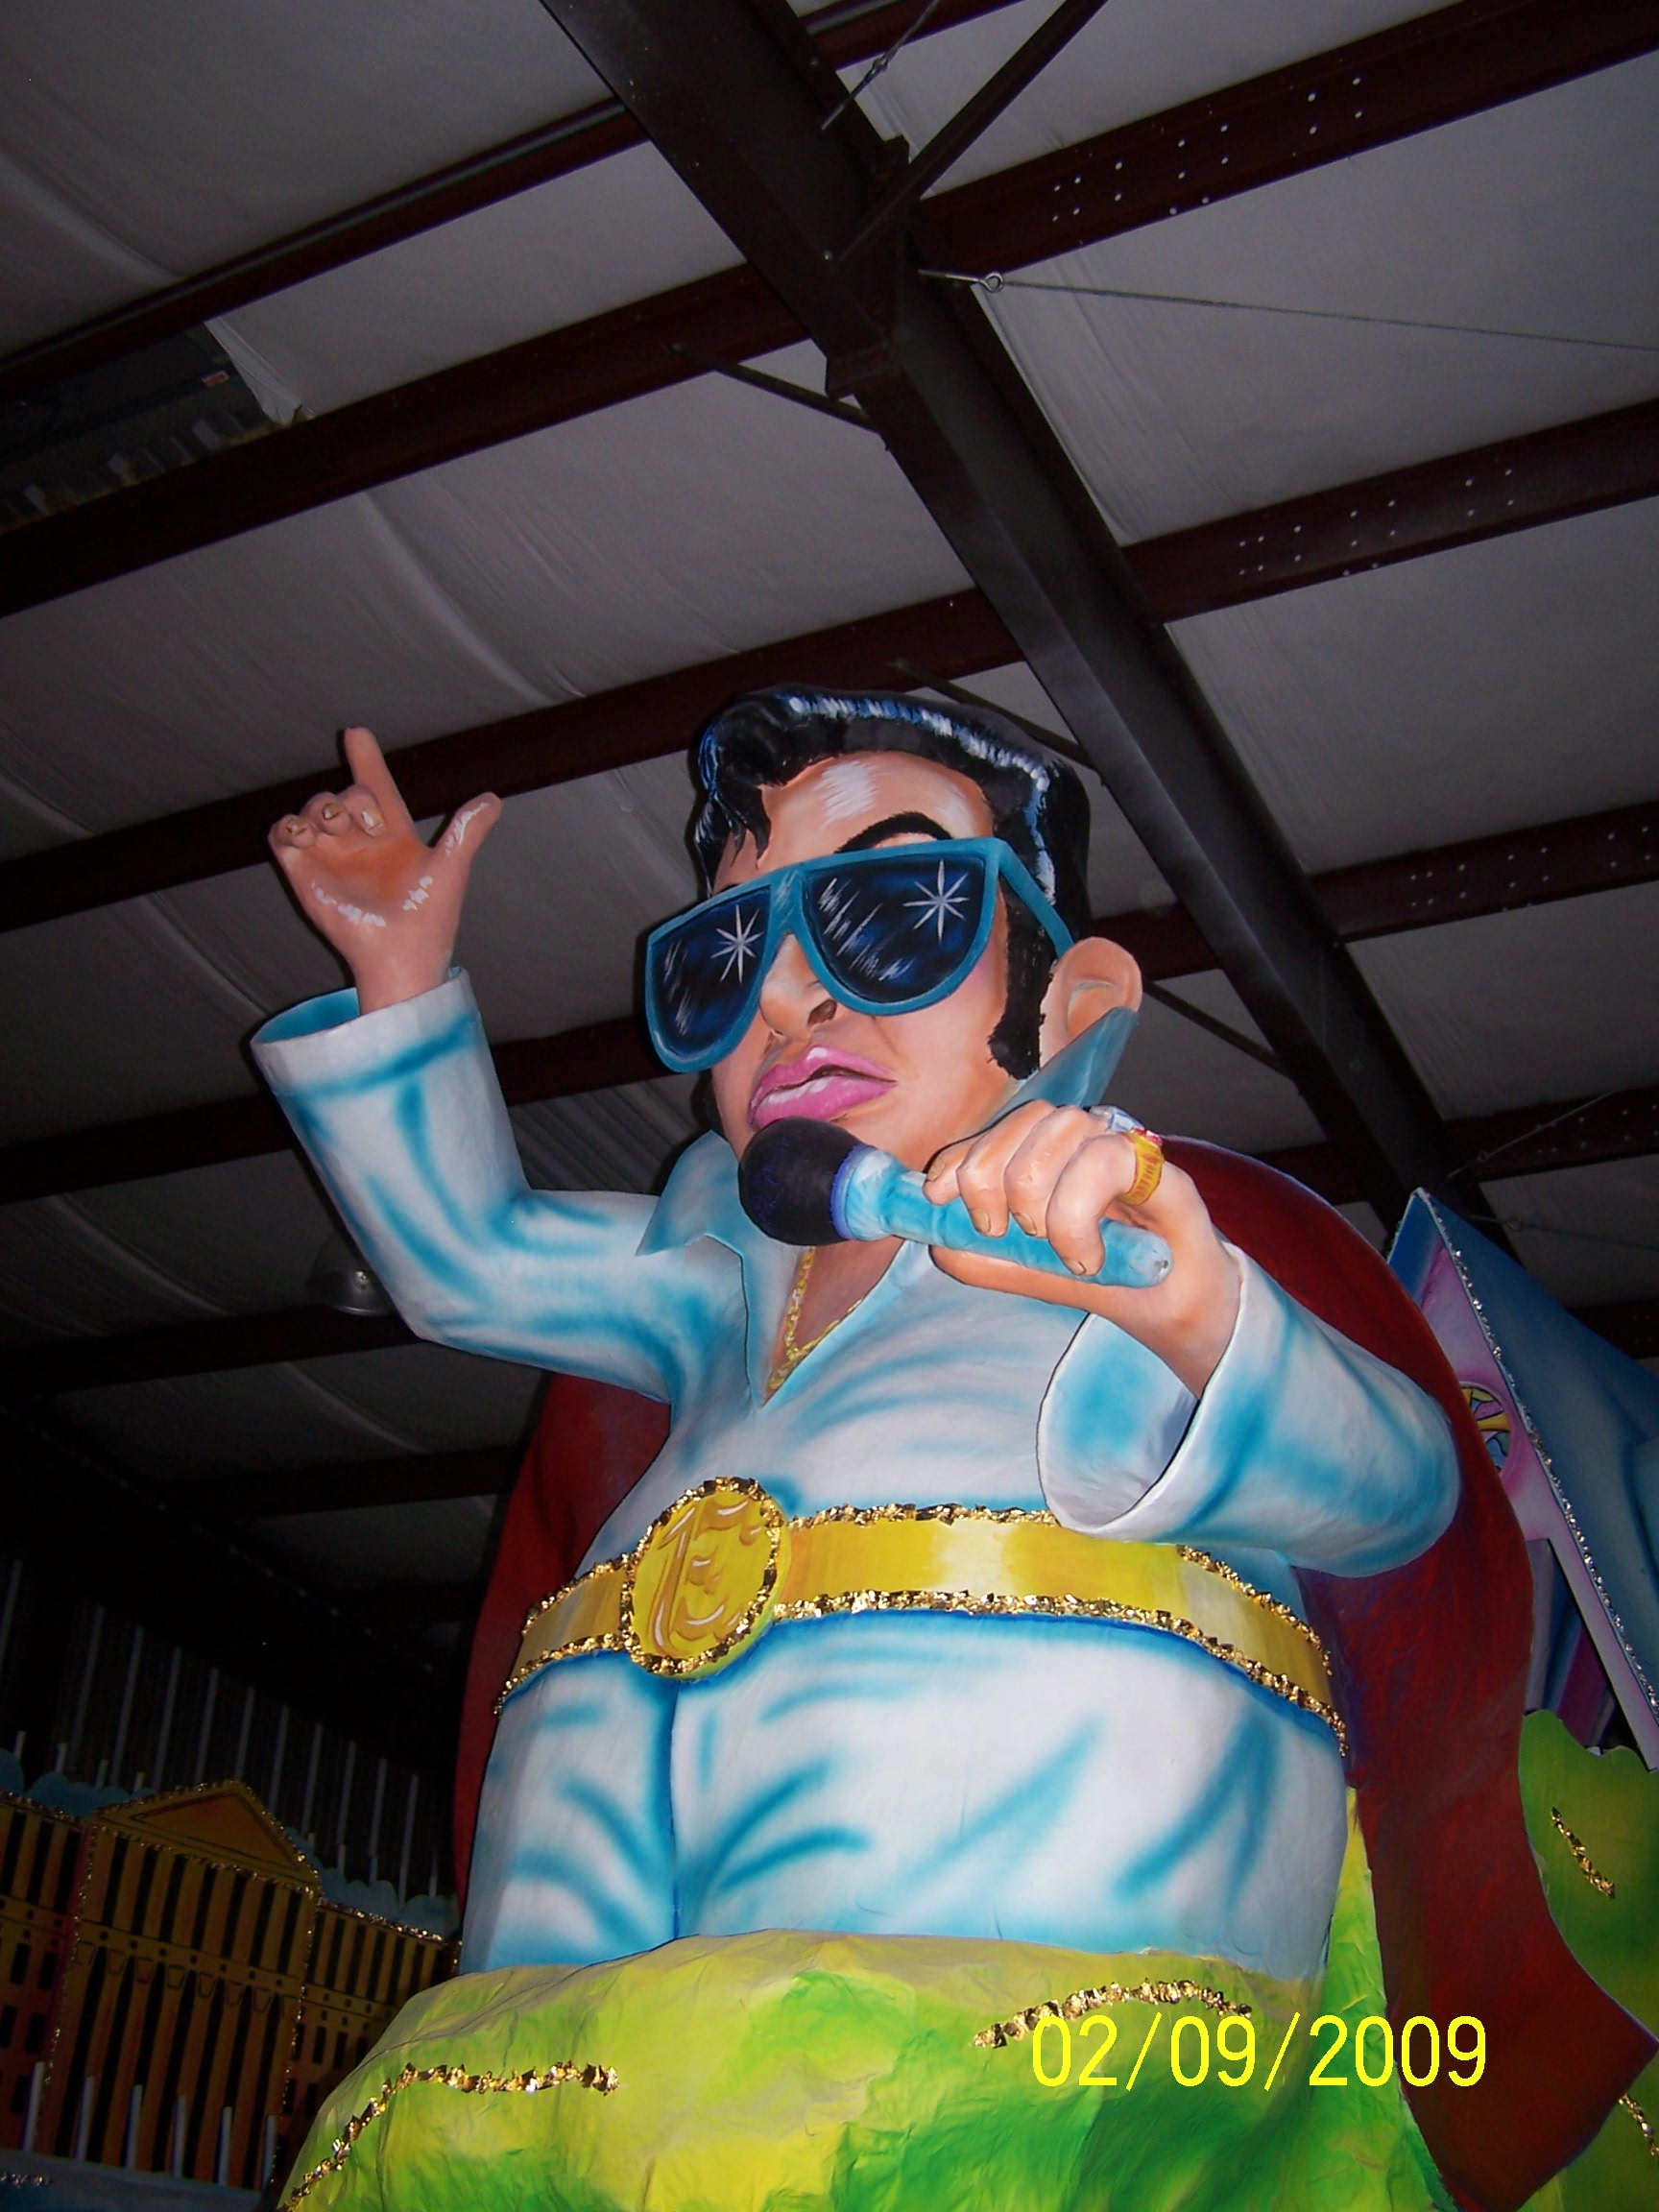 Elvis/Wedding Chapel float by Mirthco, Inc. for LaShe's